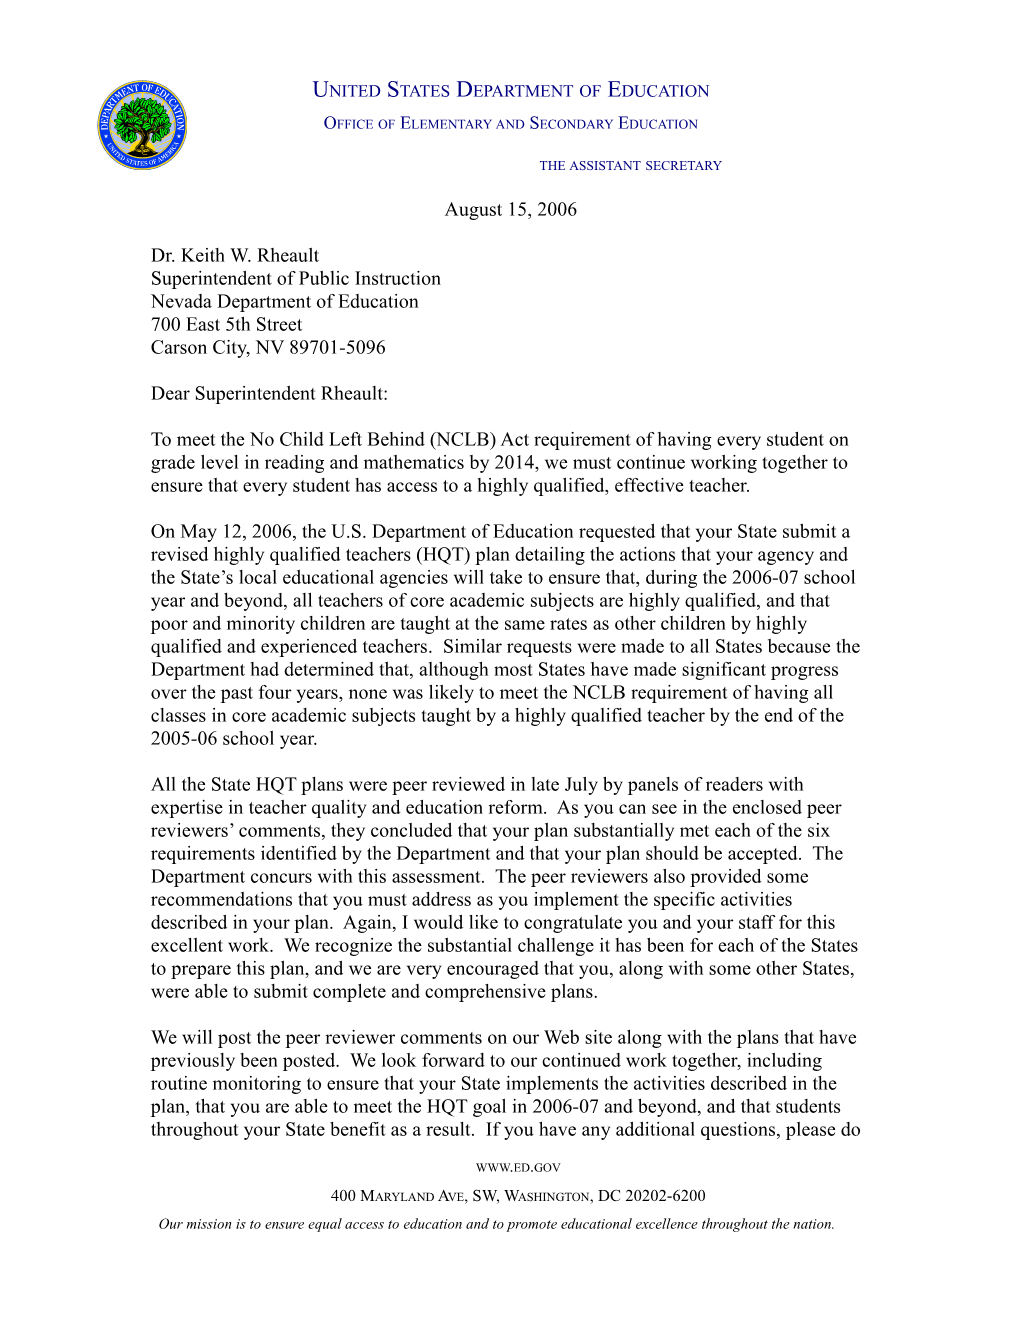 Nevada Letter to Chief State School Officer Regarding the Peer Review Comments of the Highly